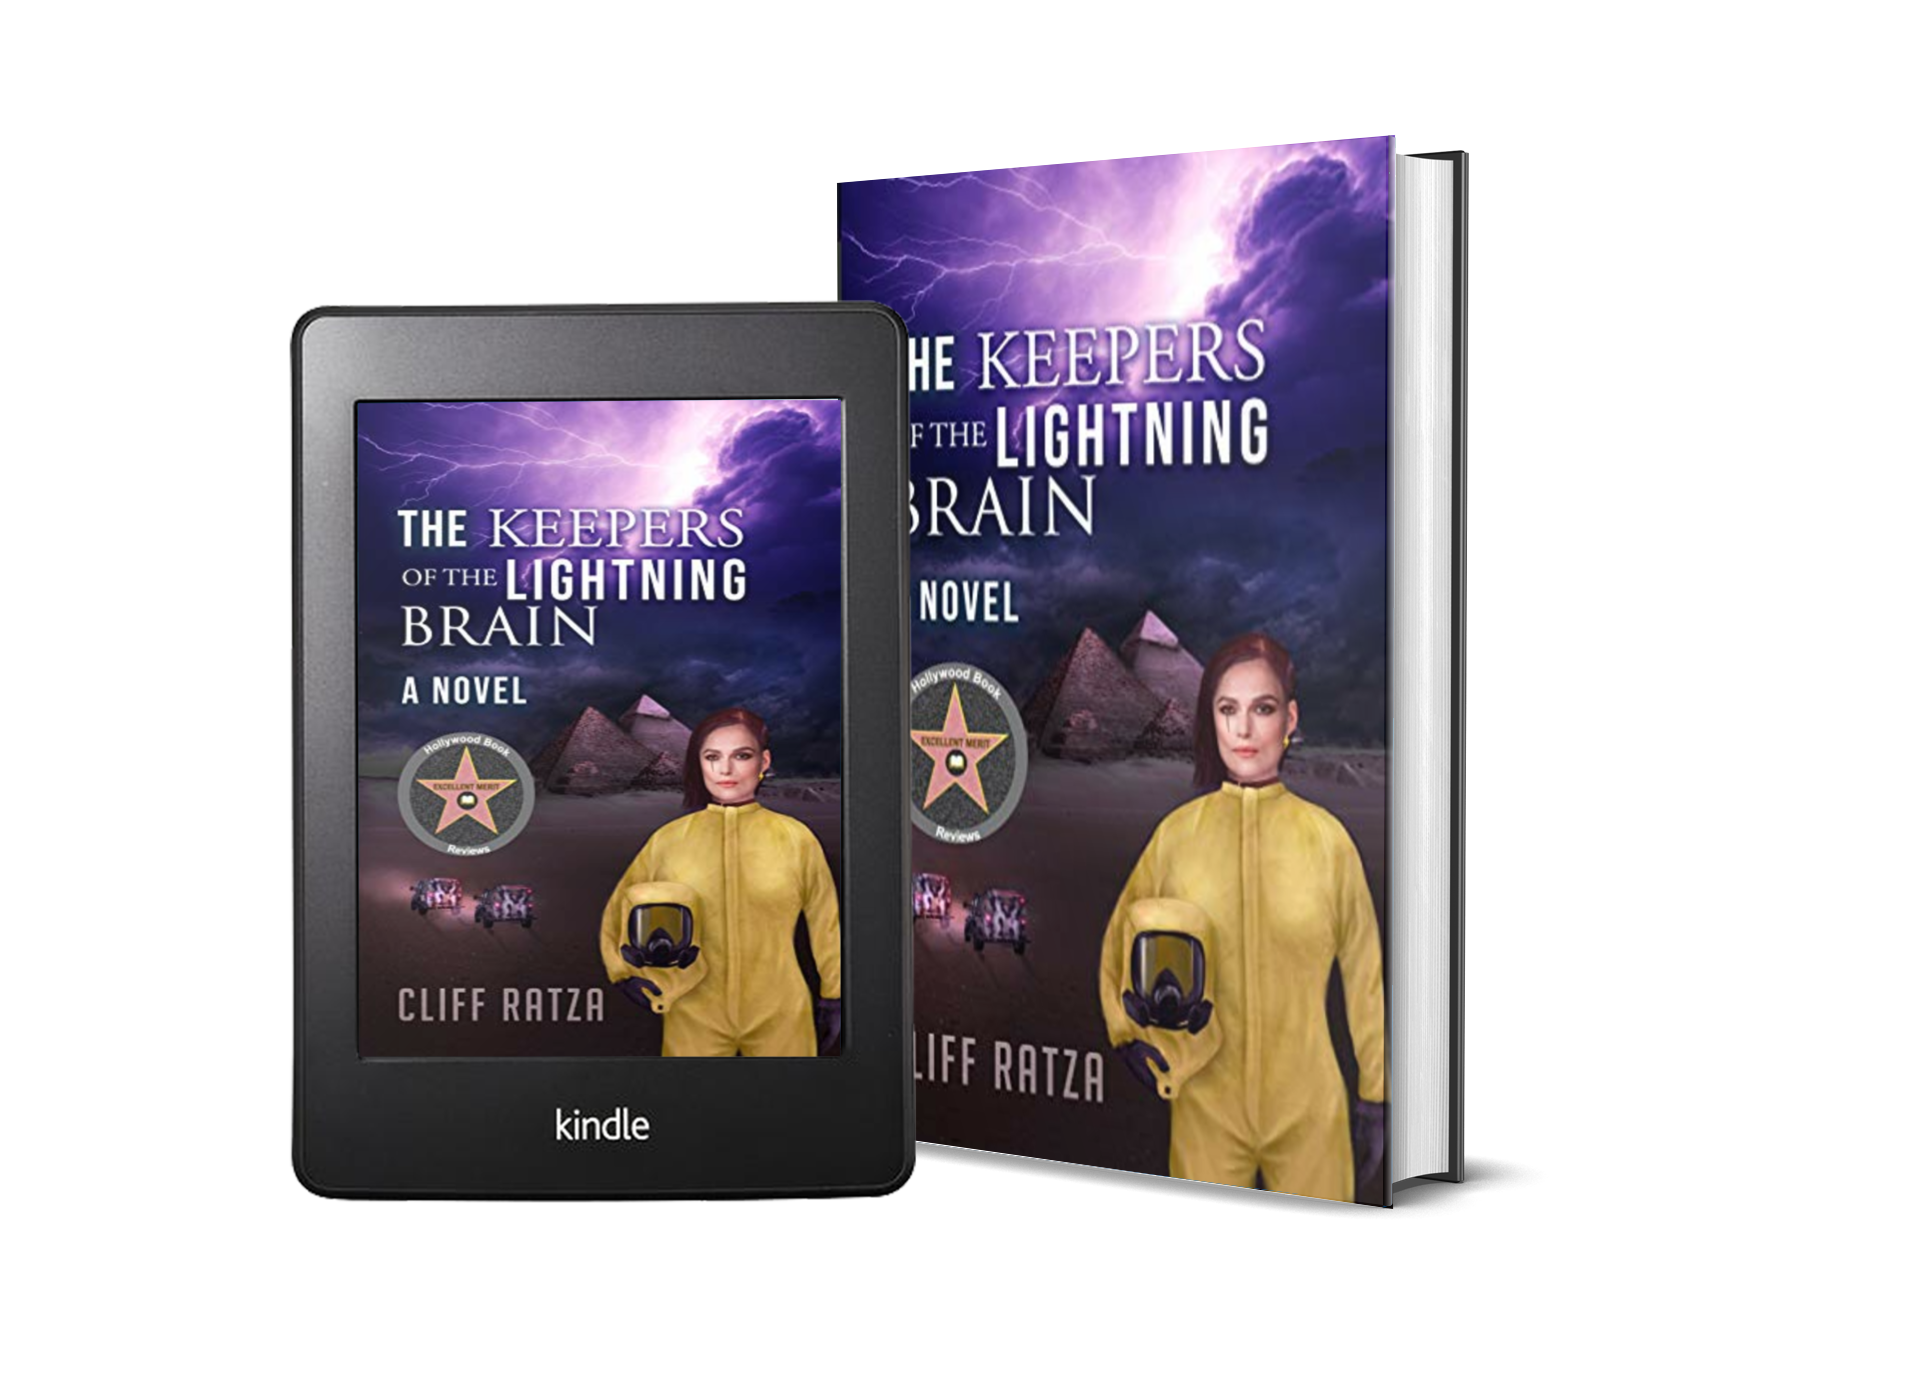 Book called The Keepers of the Lightning Brain beside its digital version